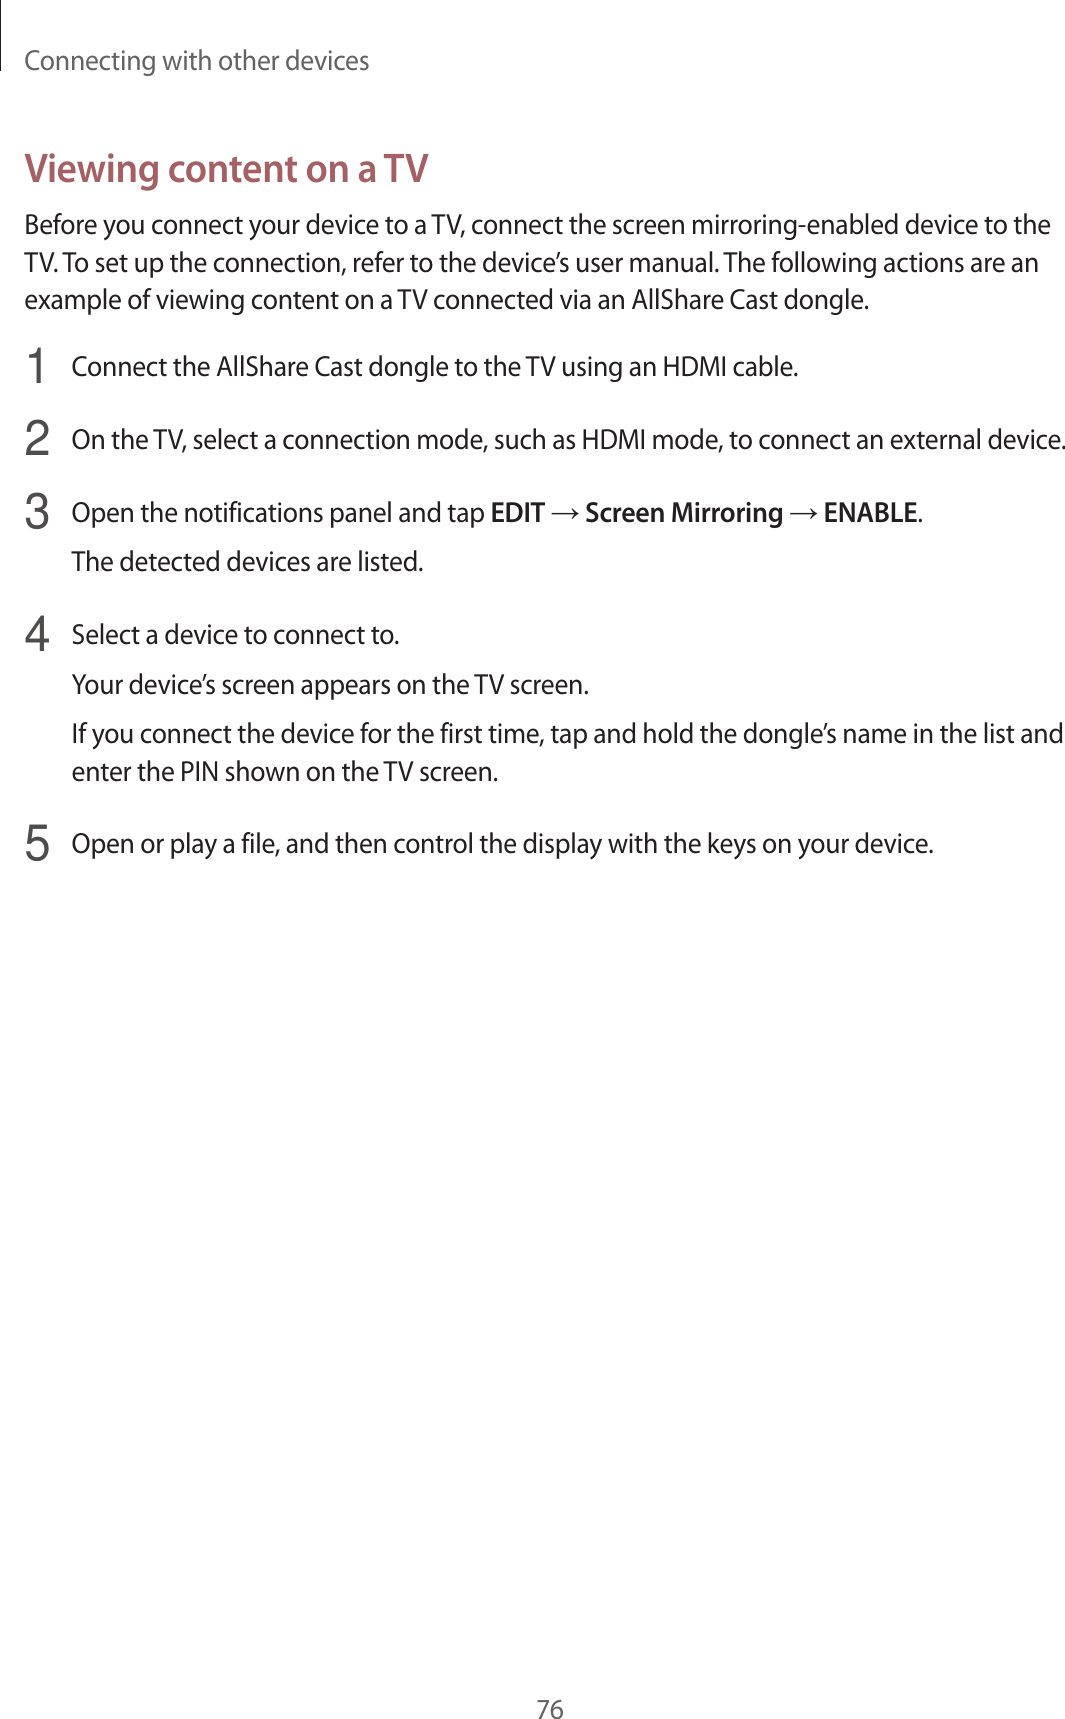 Connecting with other devices76Viewing content on a TVBefore you connect your device to a TV, connect the screen mirroring-enabled device to the TV. To set up the connection, refer to the device’s user manual. The following actions are an example of viewing content on a TV connected via an AllShare Cast dongle.1  Connect the AllShare Cast dongle to the TV using an HDMI cable.2  On the TV, select a connection mode, such as HDMI mode, to connect an external device.3  Open the notifications panel and tap EDIT → Screen Mirroring → ENABLE.The detected devices are listed.4  Select a device to connect to.Your device’s screen appears on the TV screen.If you connect the device for the first time, tap and hold the dongle’s name in the list and enter the PIN shown on the TV screen.5  Open or play a file, and then control the display with the keys on your device.